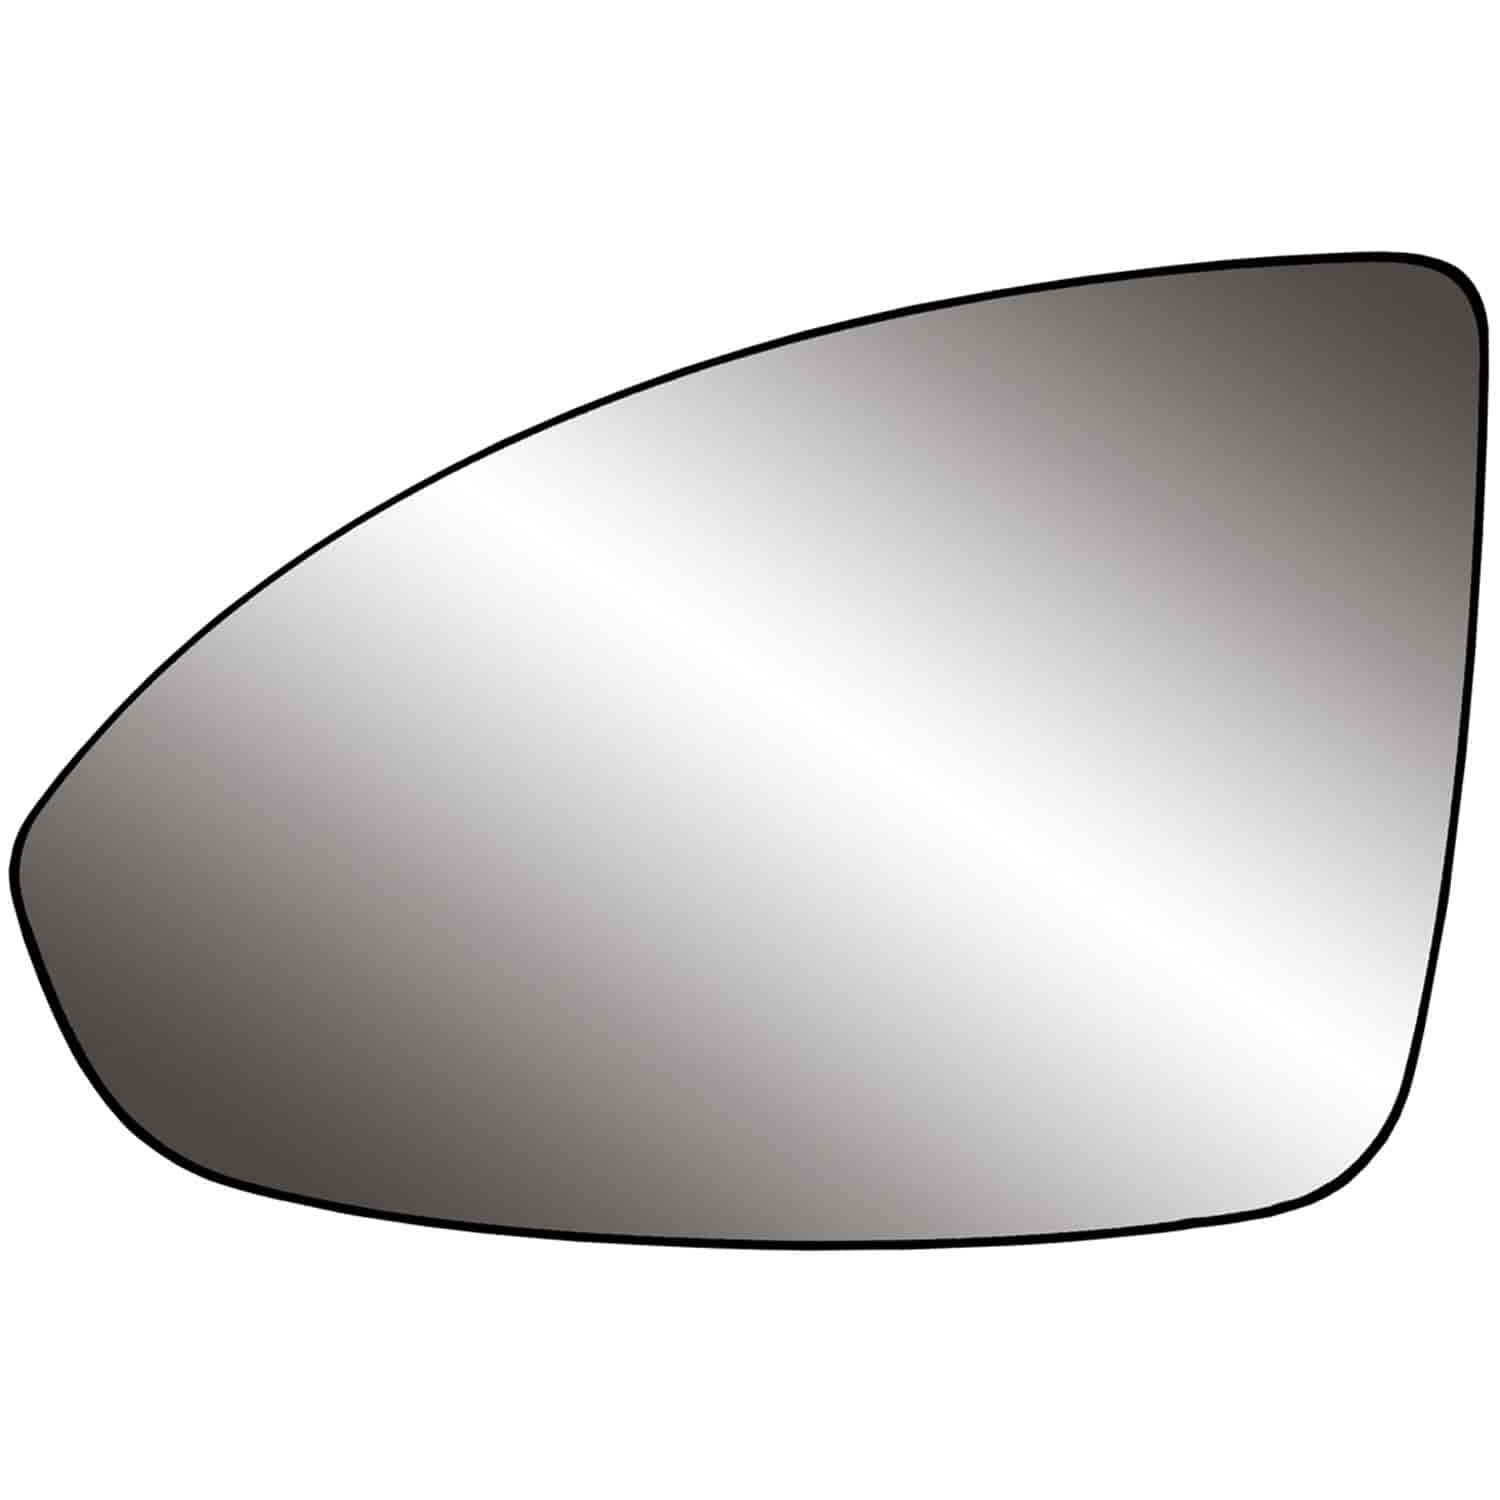 Replacement Glass Assembly for 11-14 Cruze w/o Blind Spot lens replace your cracked or broken driver